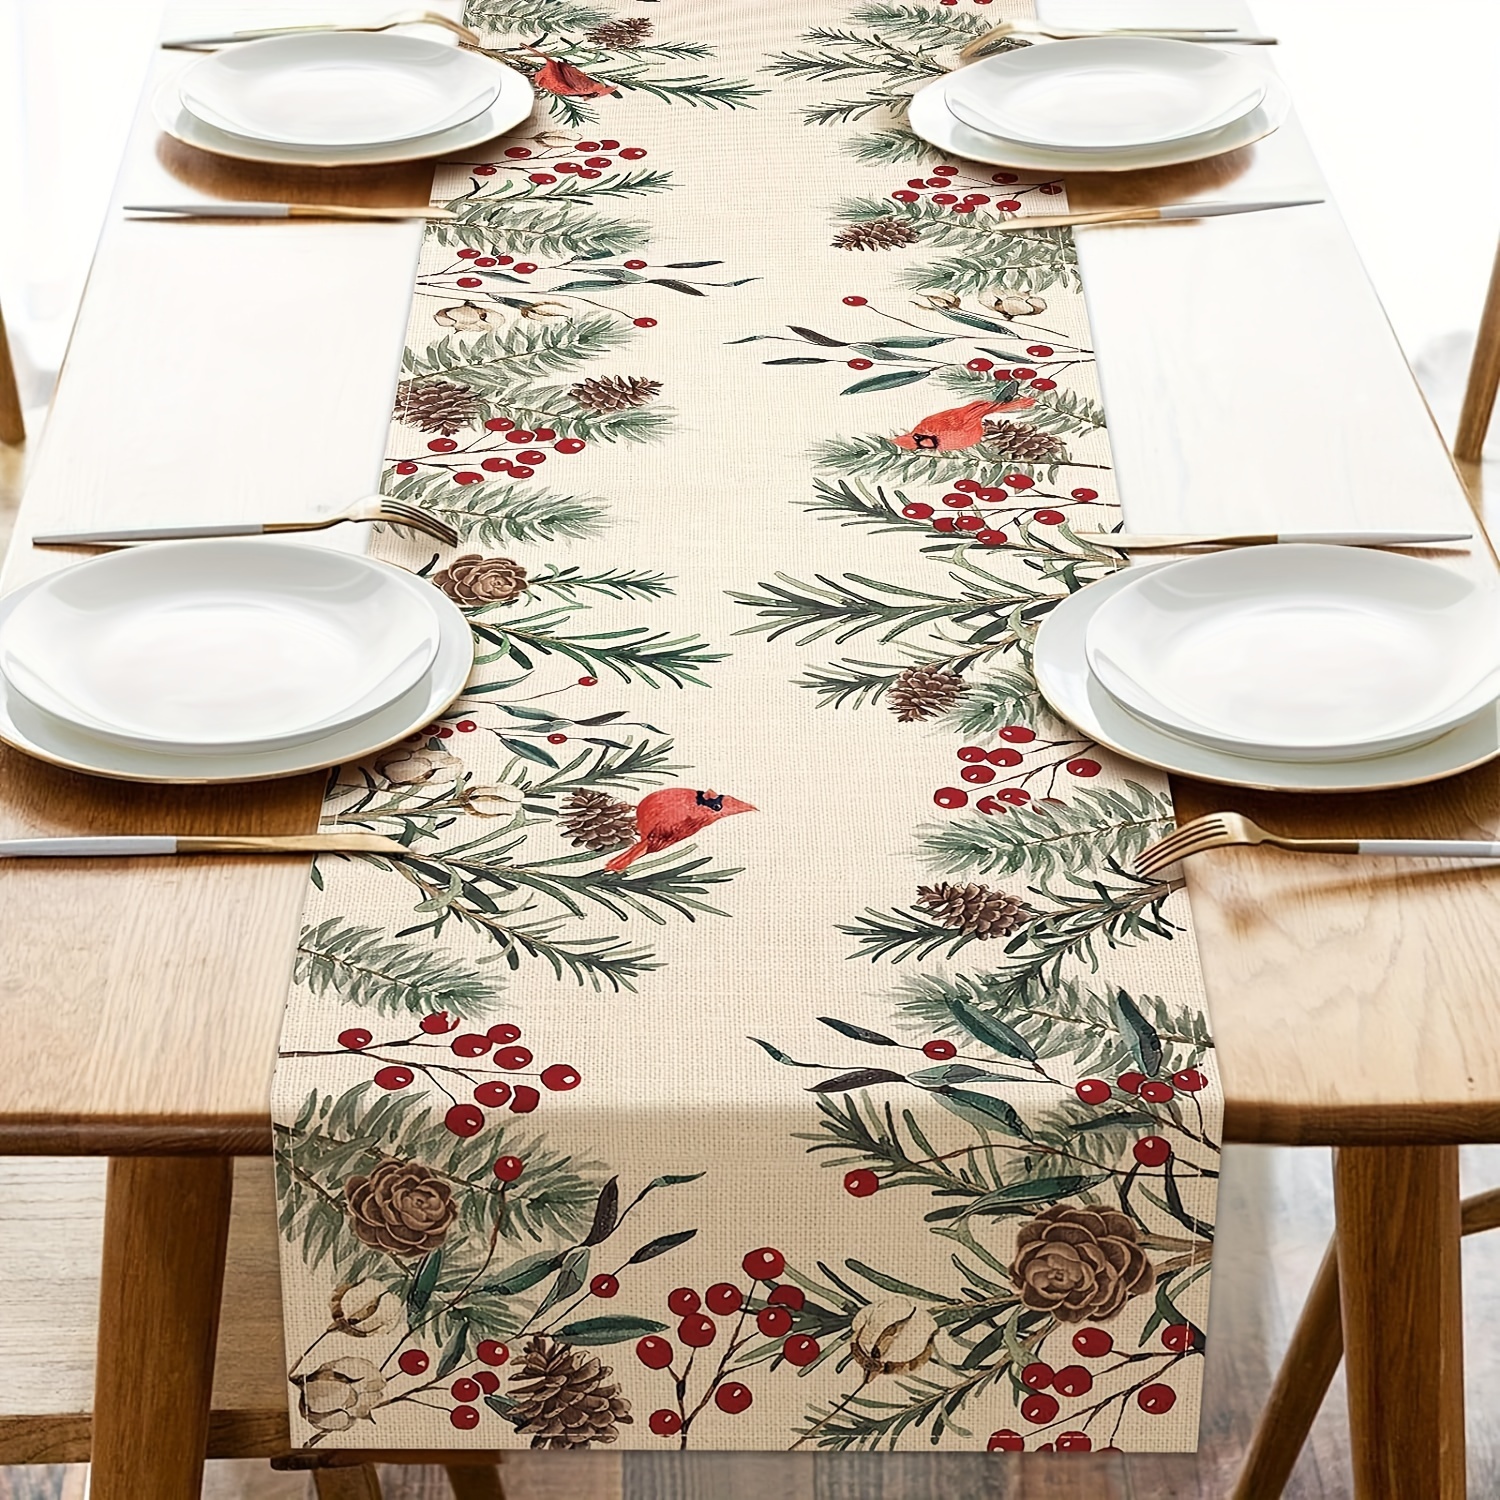 

1pc, Table Runner, Winter Theme Pine Needle Branches Printed Table Runner, Pine Cone Red Birds Berry Farmhouse Kitchen Dining Table Decor, Christmas Holiday Home Decoration